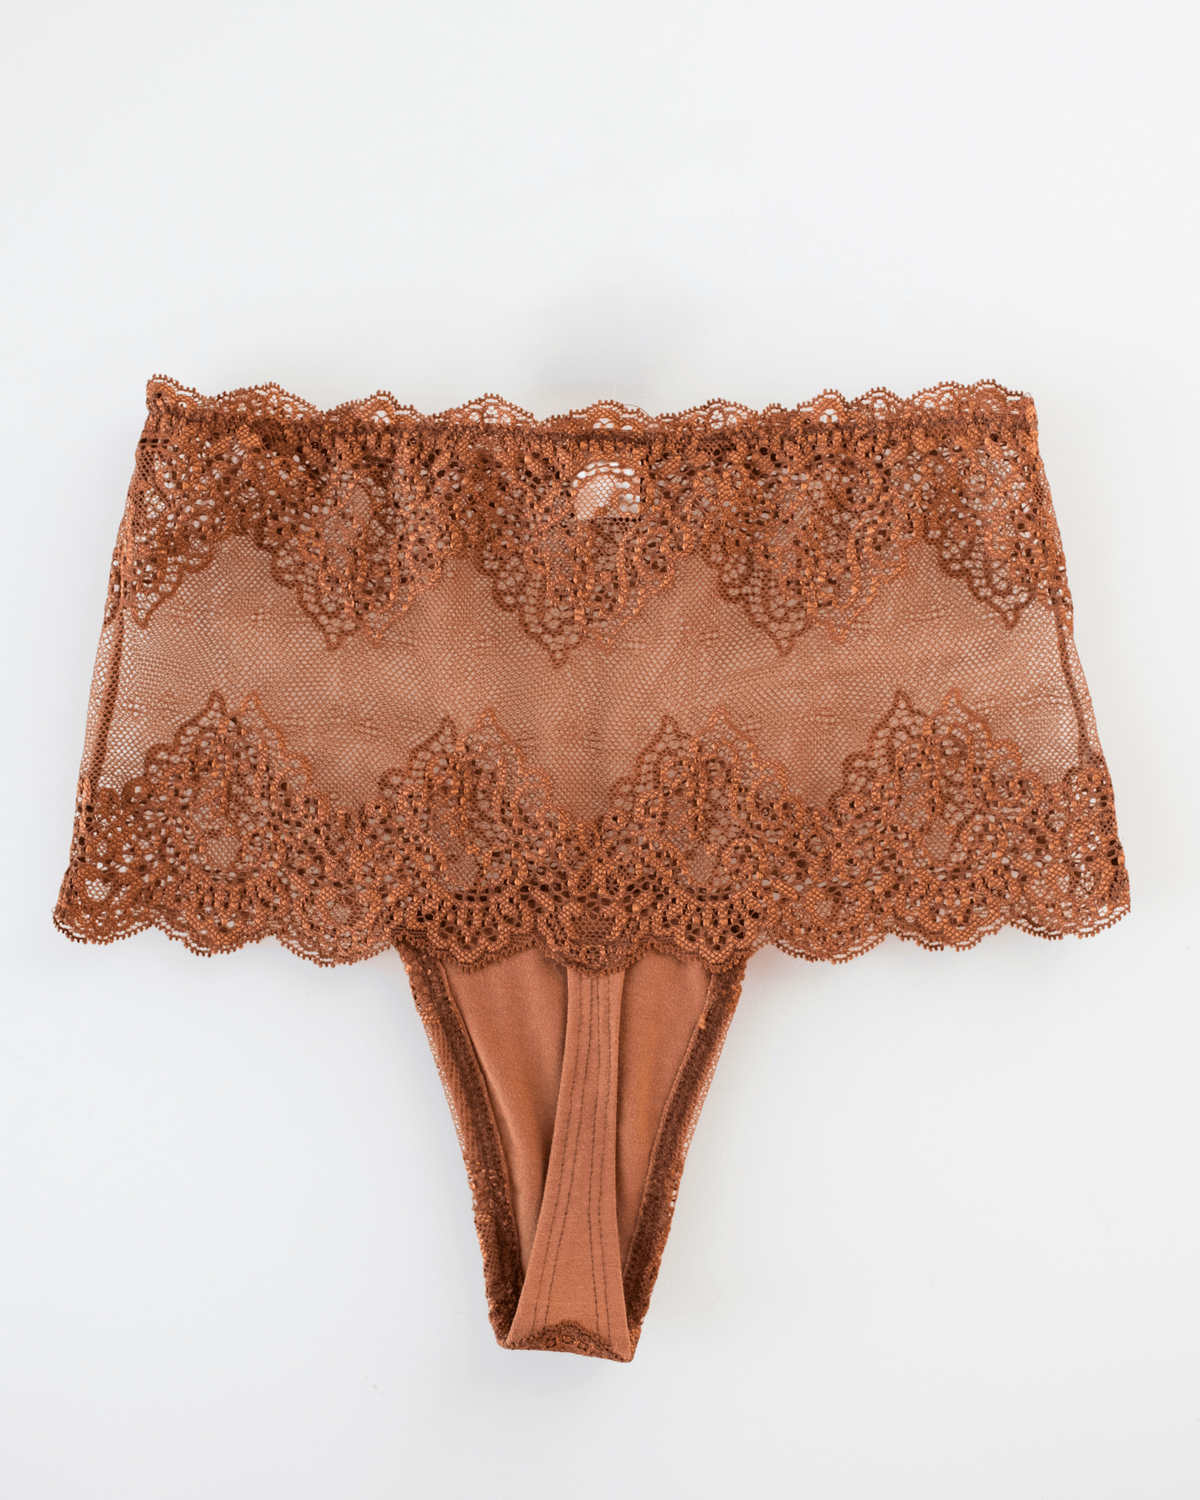 Only Hearts Lingerie SF w/ Lace Hi-Waist Thong in Fox